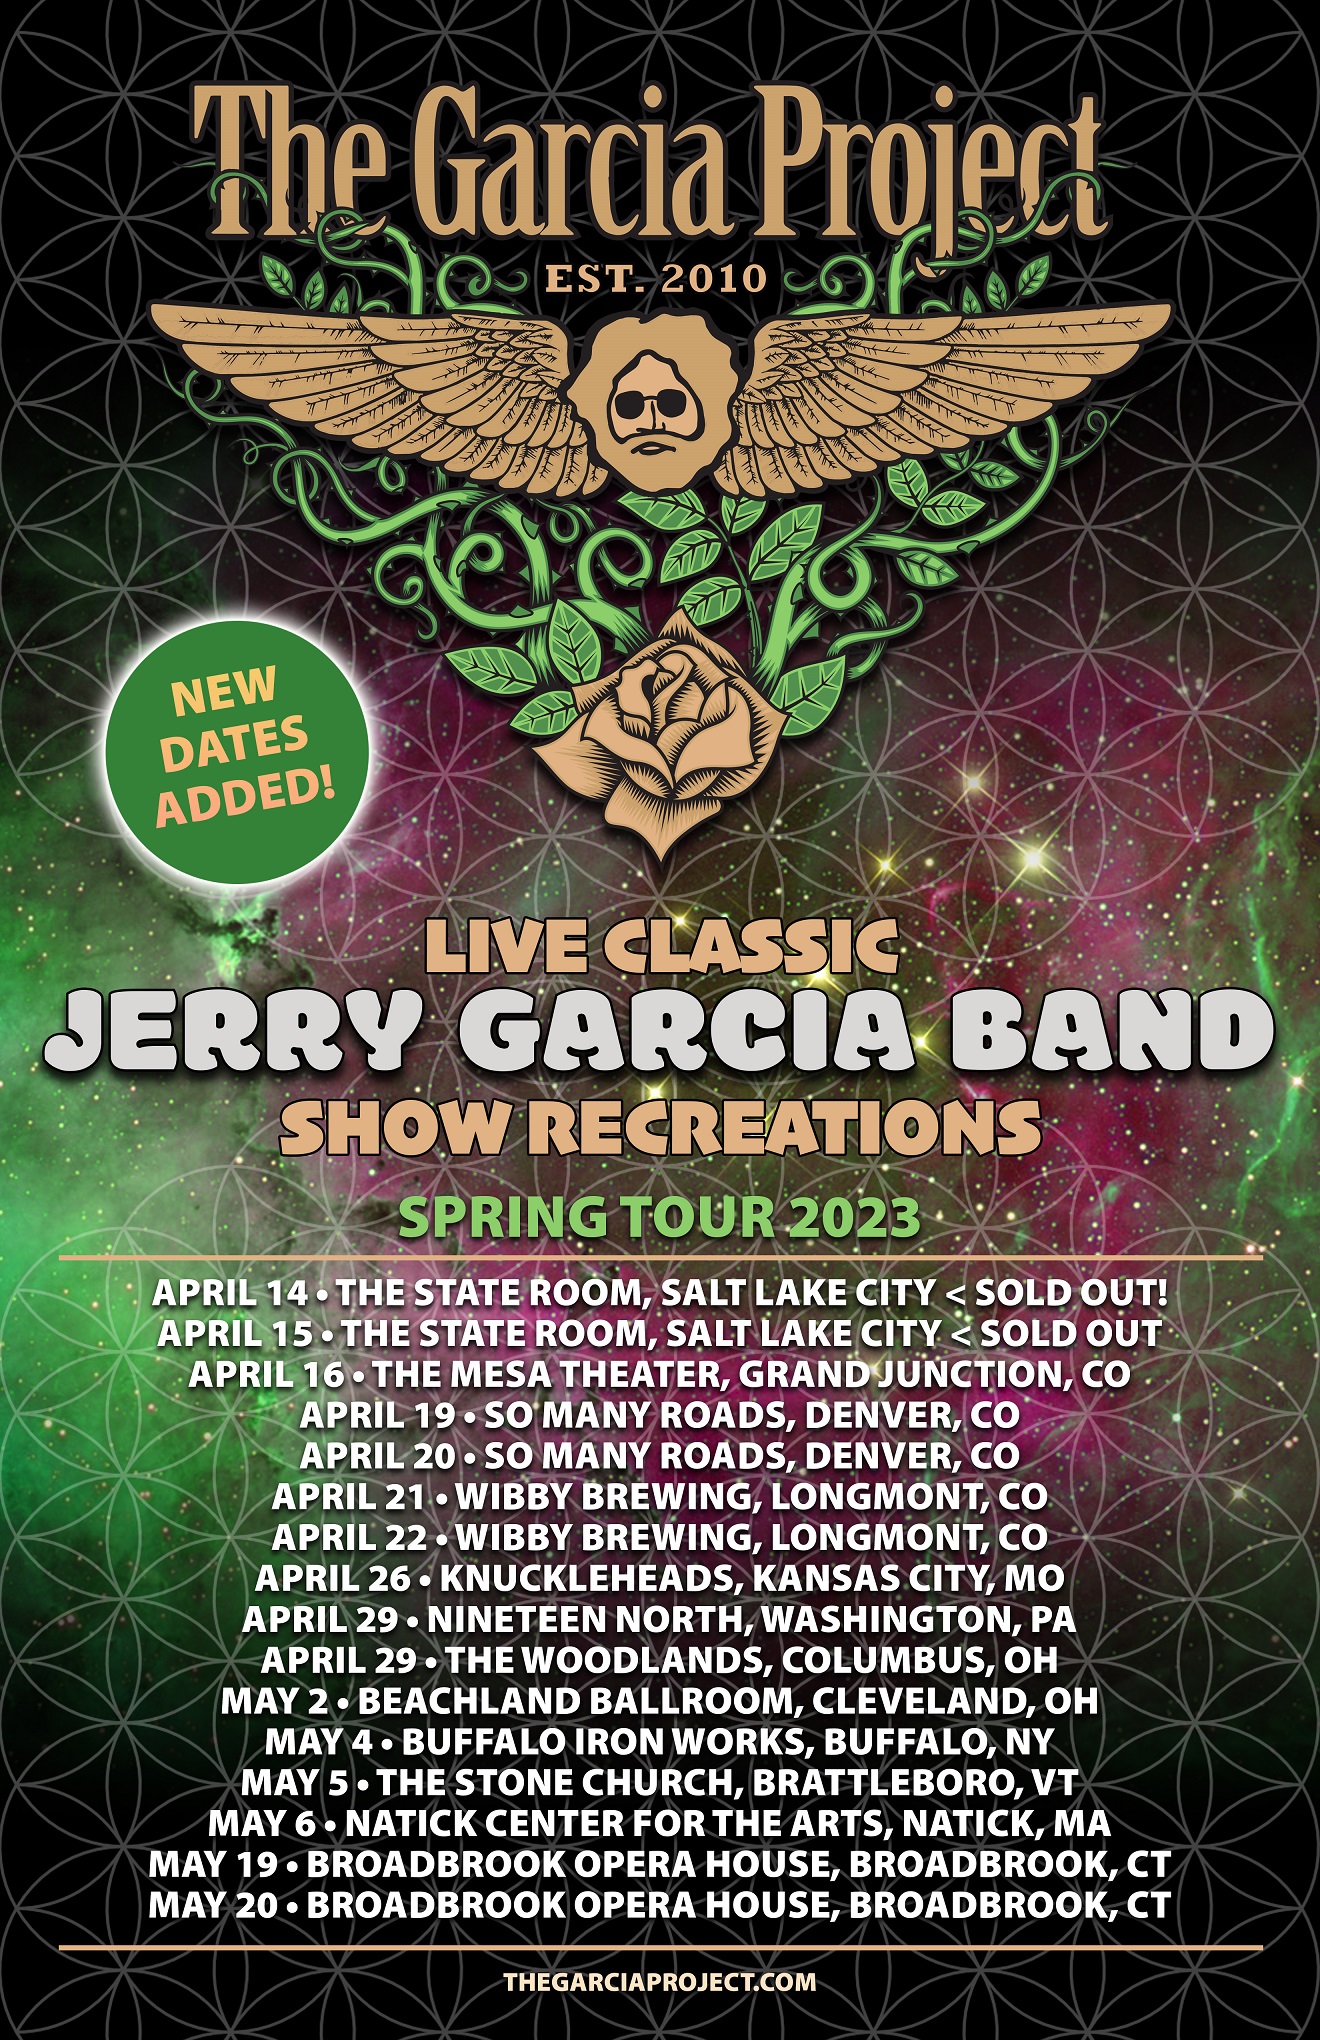 The Garcia Project in on tour now